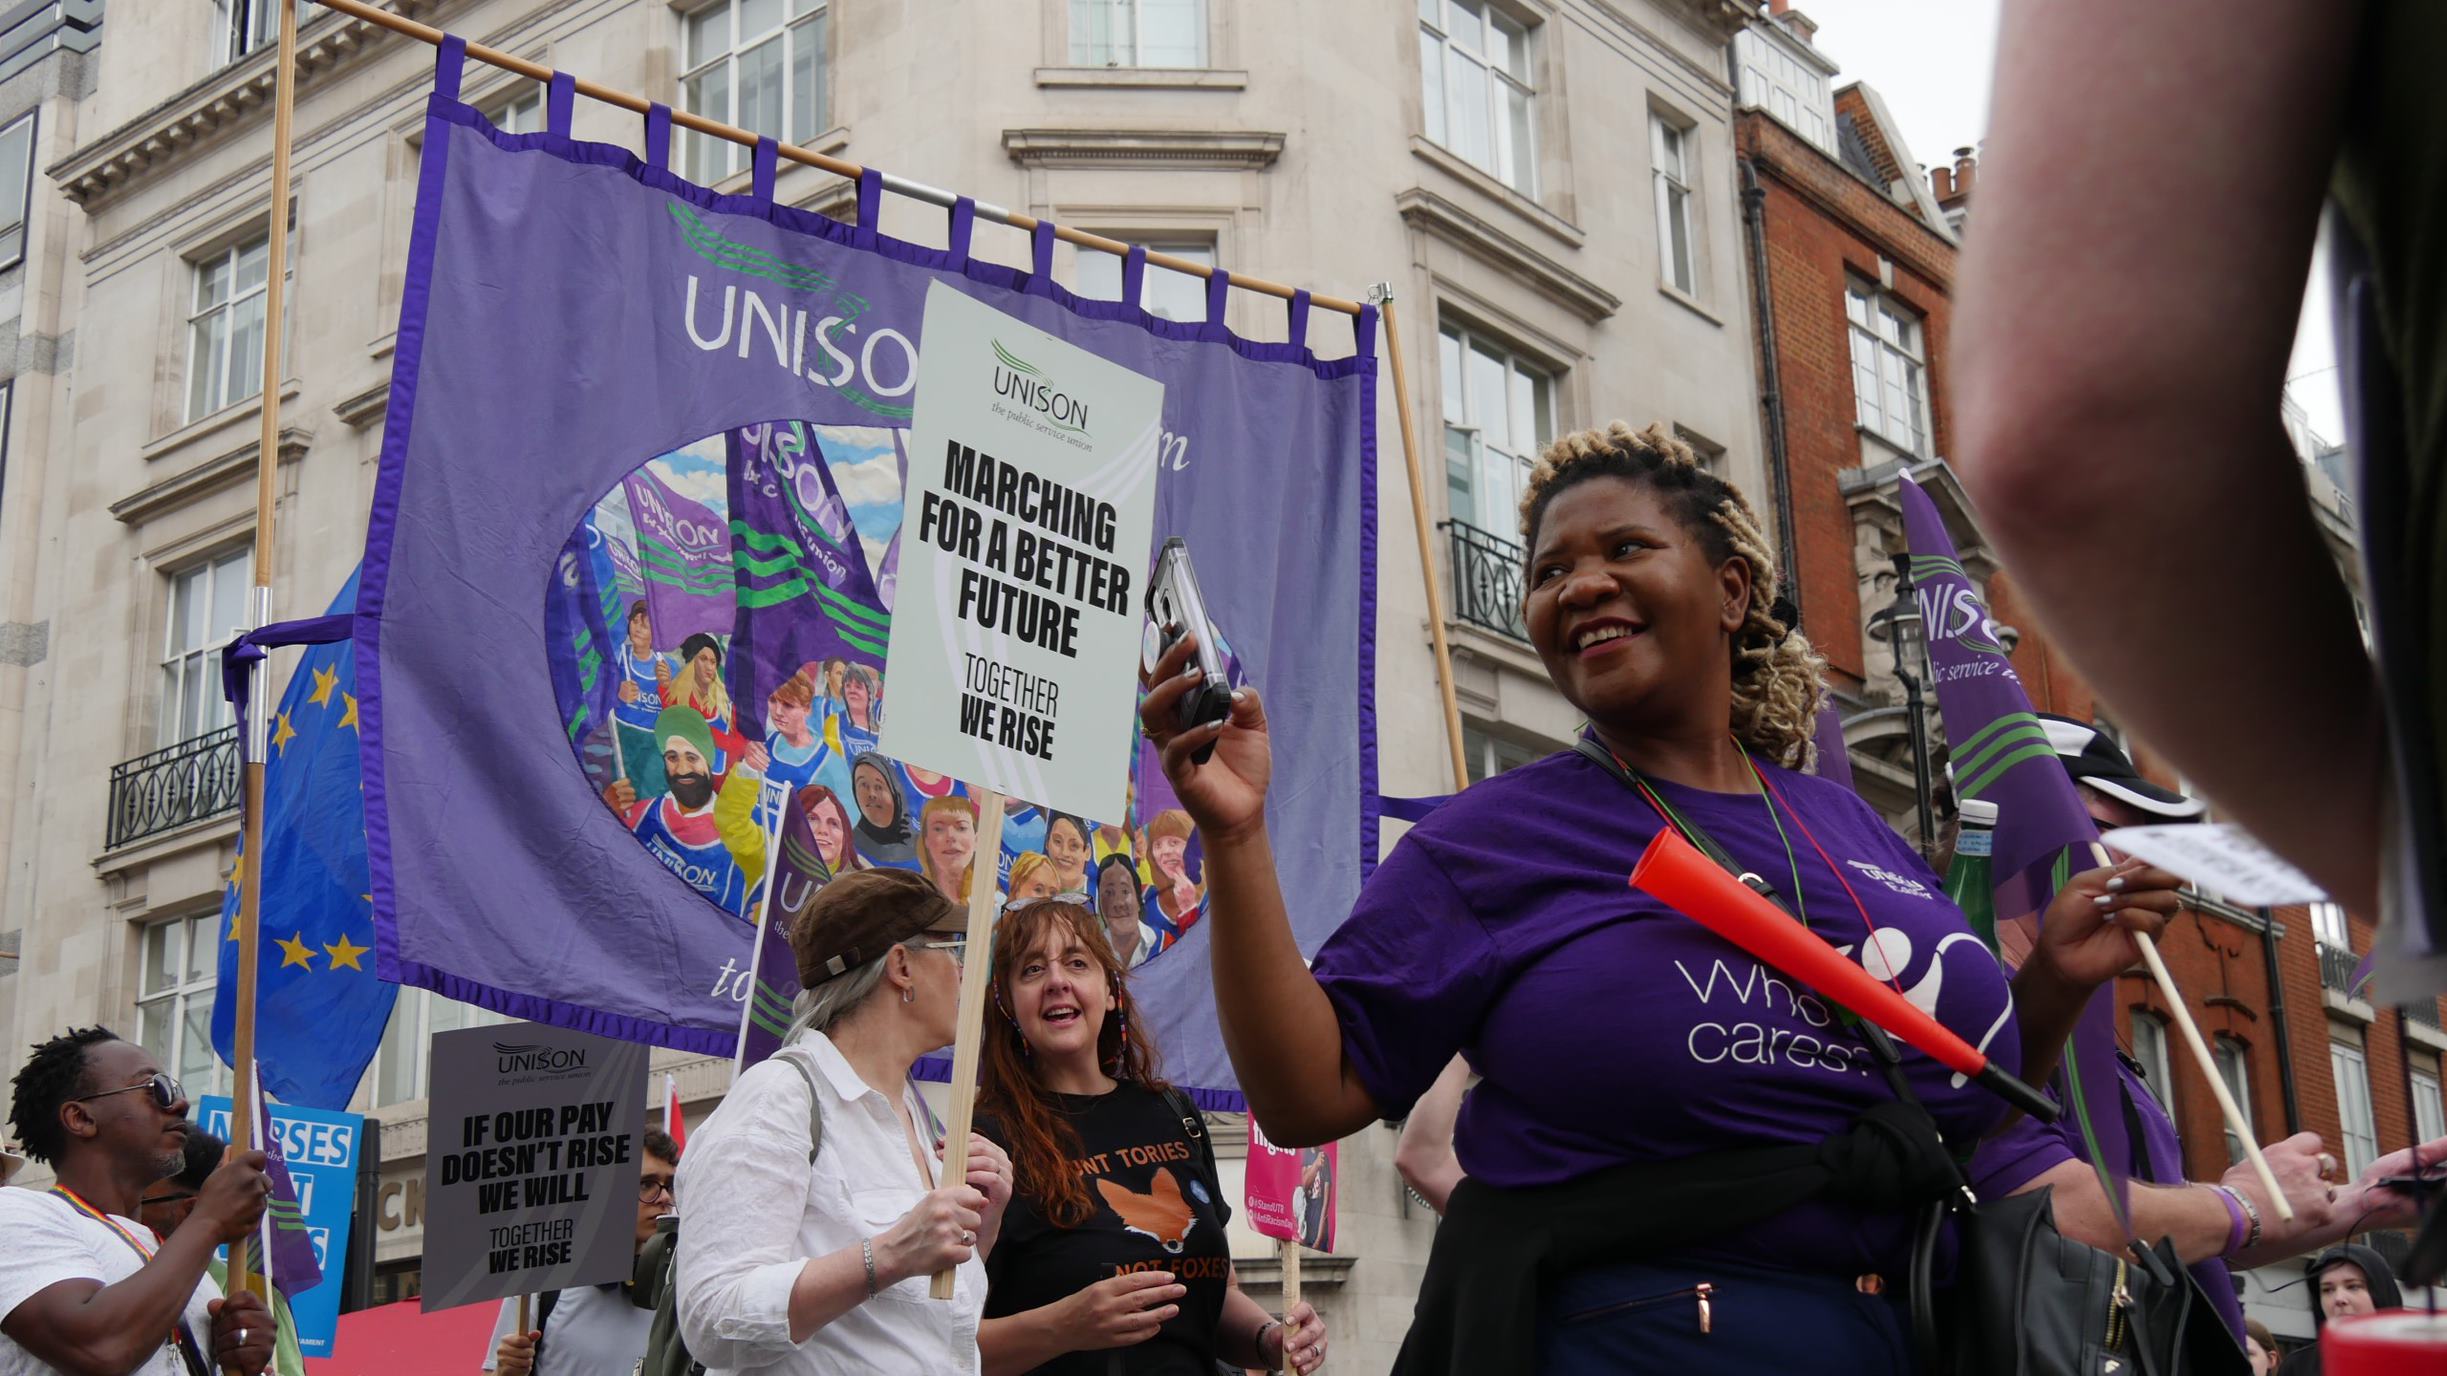 Trade unionists travelled from across the UK to join a demonstration against low pay and the rising cost of living in London last month